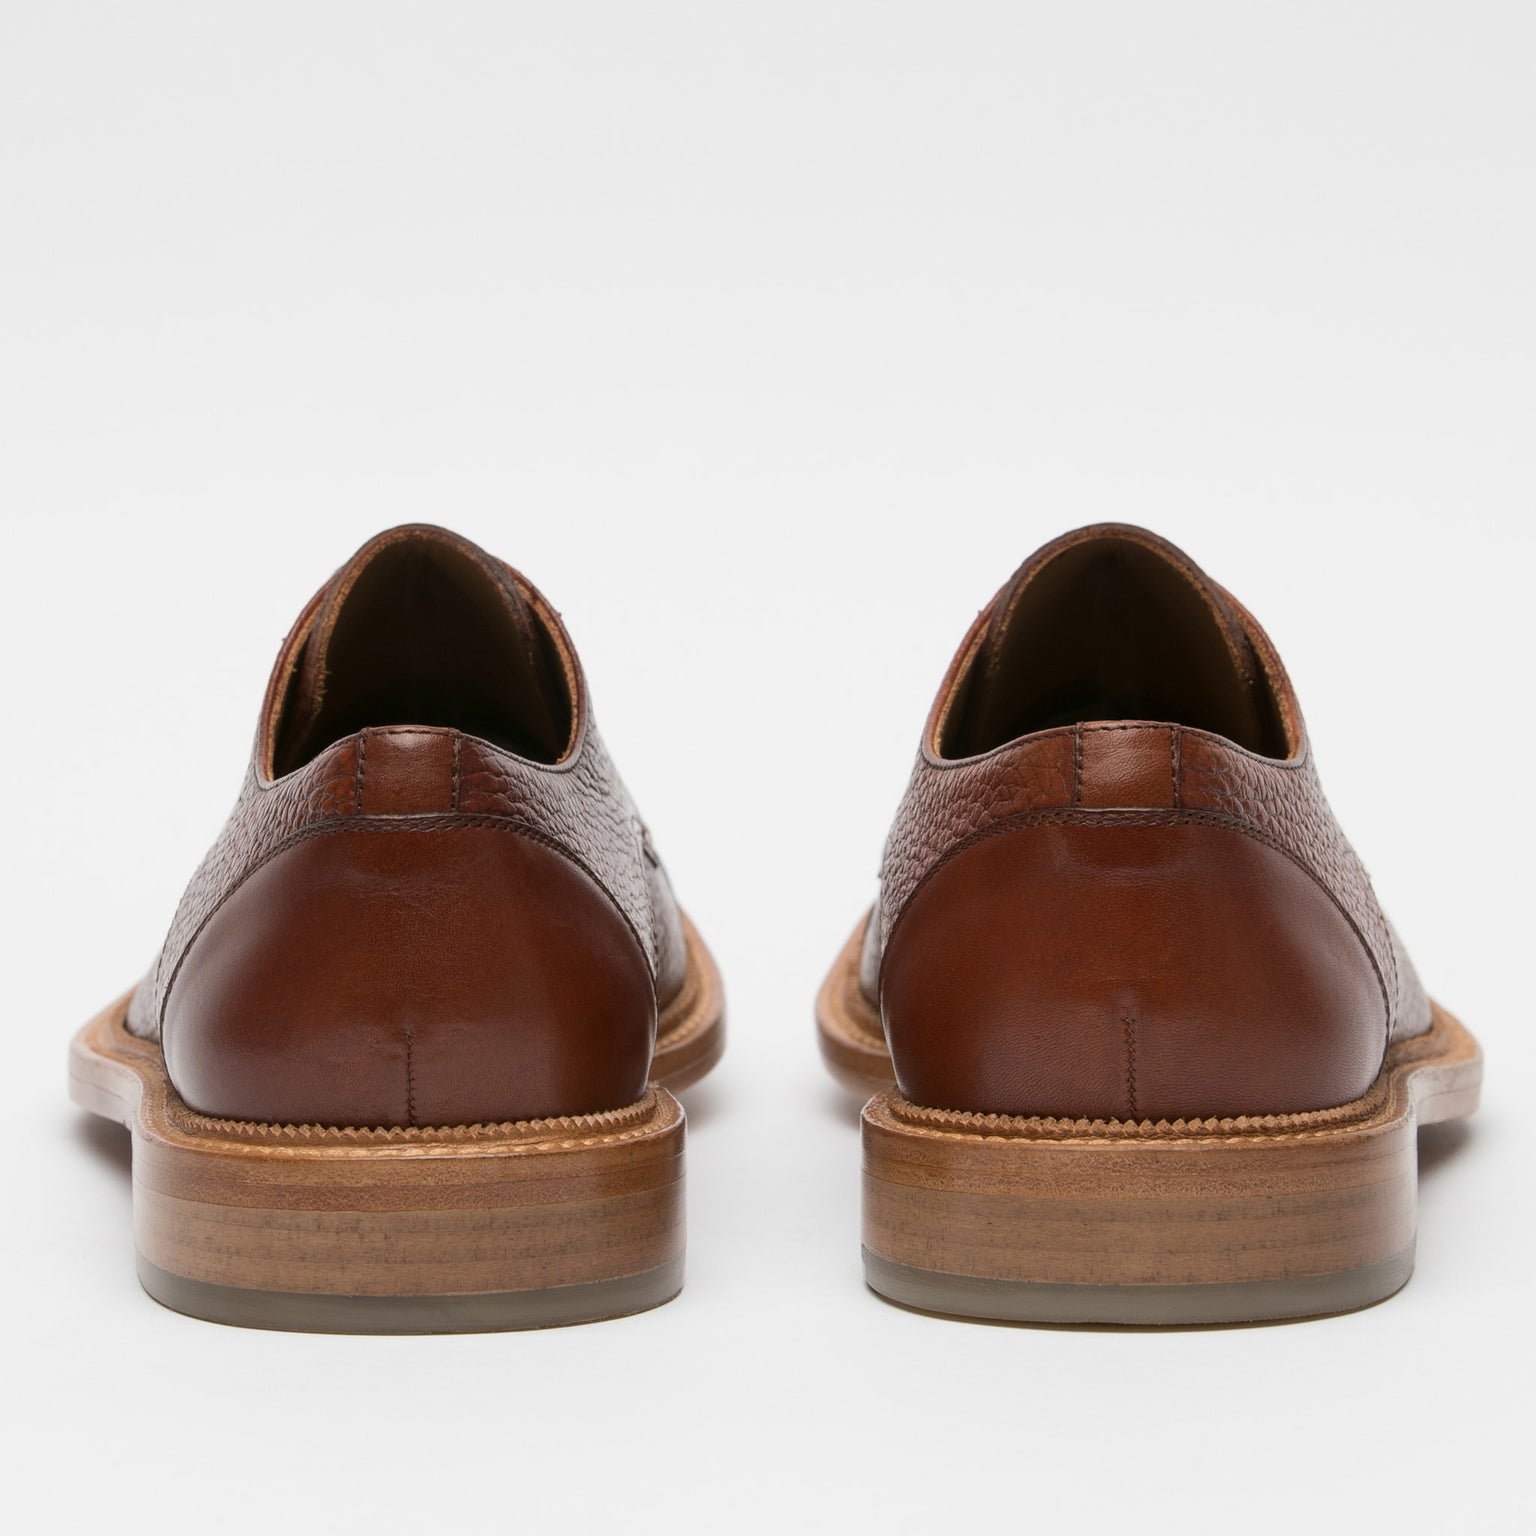 The Rome Shoe - Brown Leather Shoes | TAFT